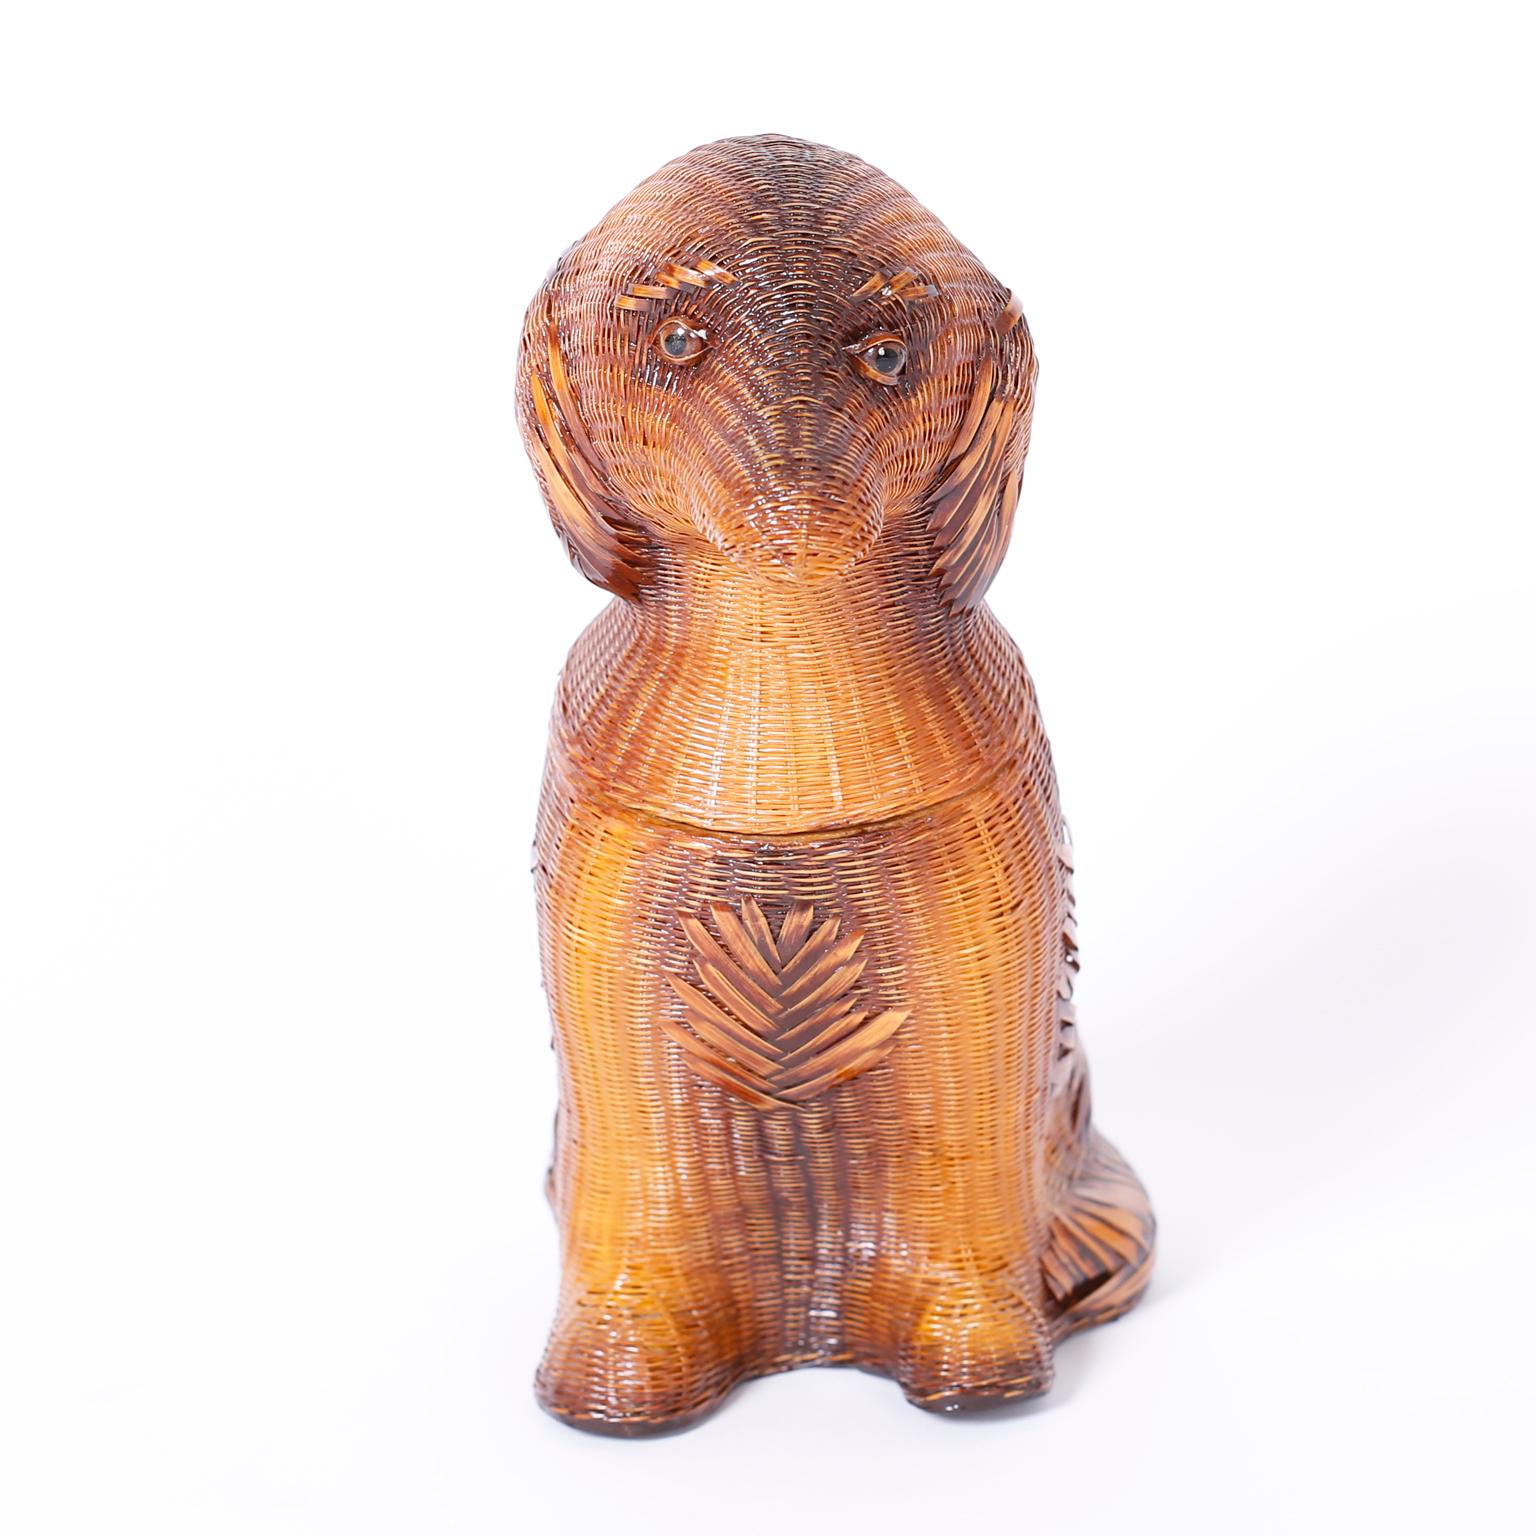 Vintage Chinese puppy box or basket from the famed Shanghai collection with a removable head crafted with wicker and reed.